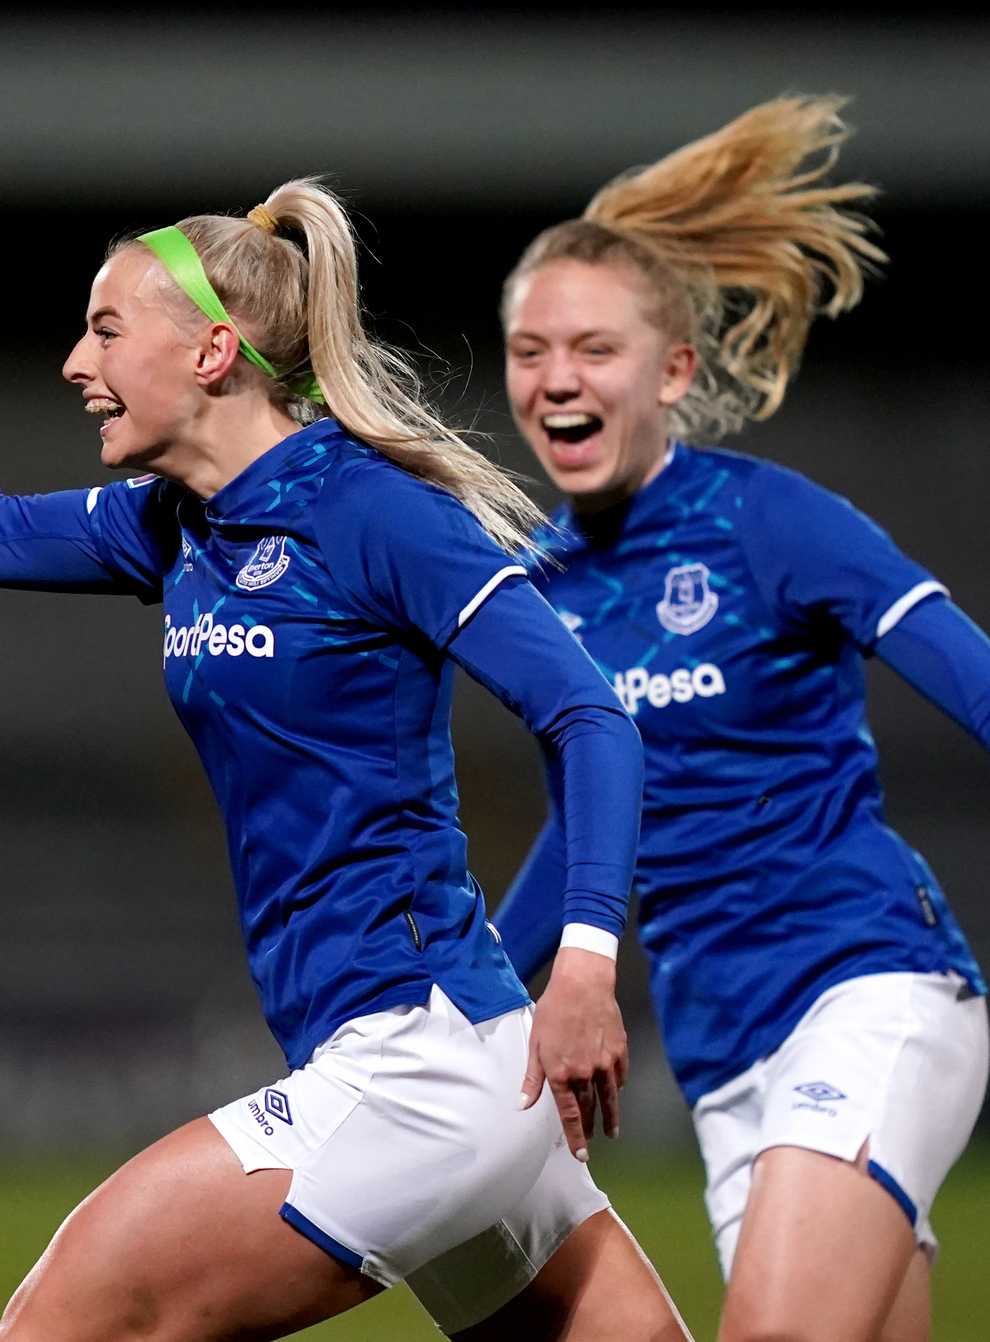 Everton's Chloe Kelly celebrates scoring her side's first goal of the game against Spurs in February (PA Images)